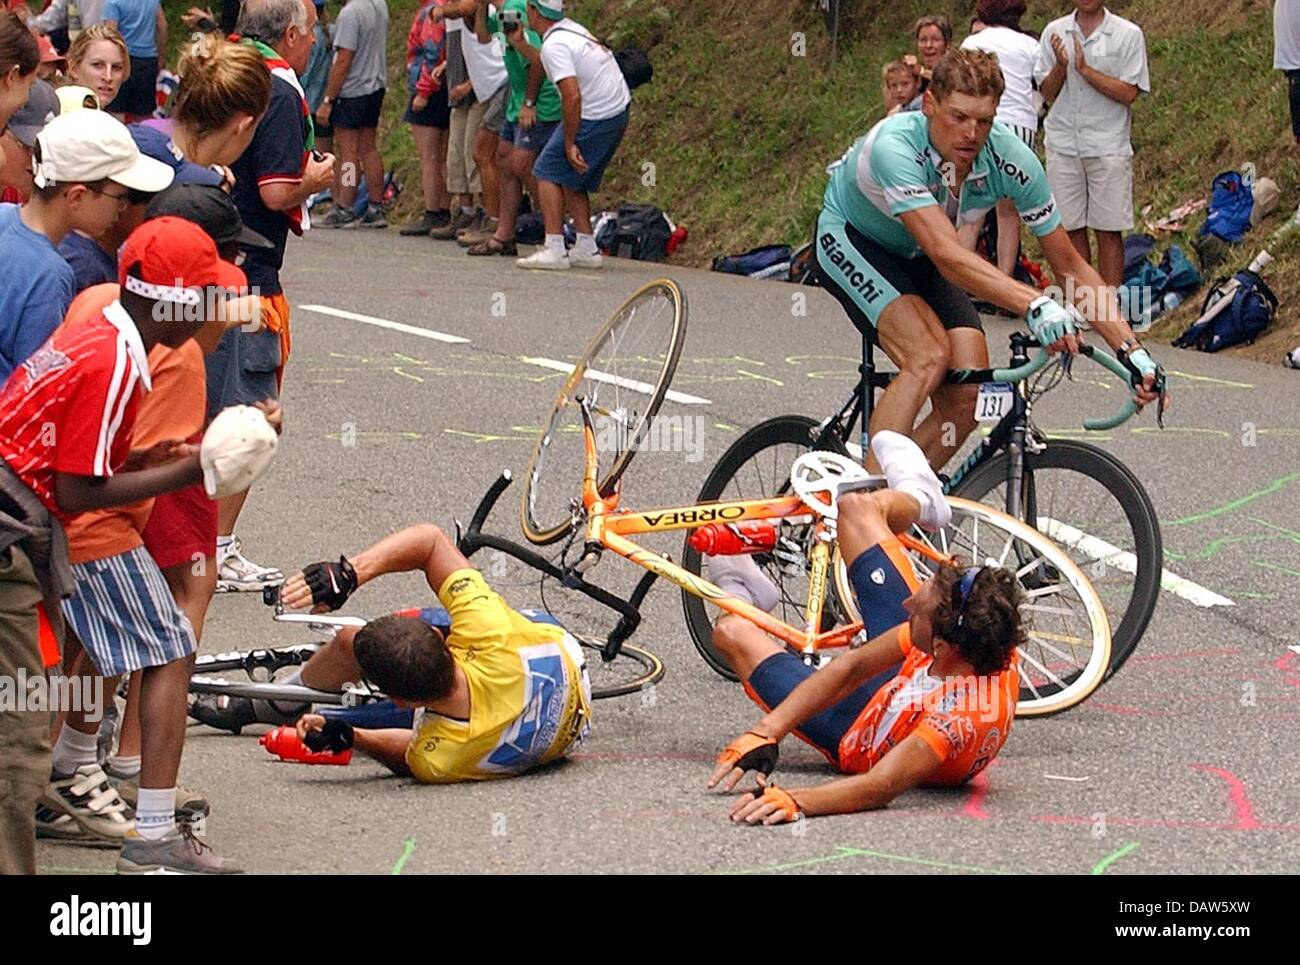 (FILE) - German cyclist Jan Ullrich (R) avoids to crash into US American cycling legend Lance Armstrong and Spanish Iban Mayo (C) during the 15th stage of the Tour de France 2003 in Luz-Ardiden, France, 21 July 2003. Former Tour de France winner Ullrich announced his retirement from cycling at the age of 33 on Monday, 26 February 2006. Ullrich, who is alleged having been implicated Stock Photo